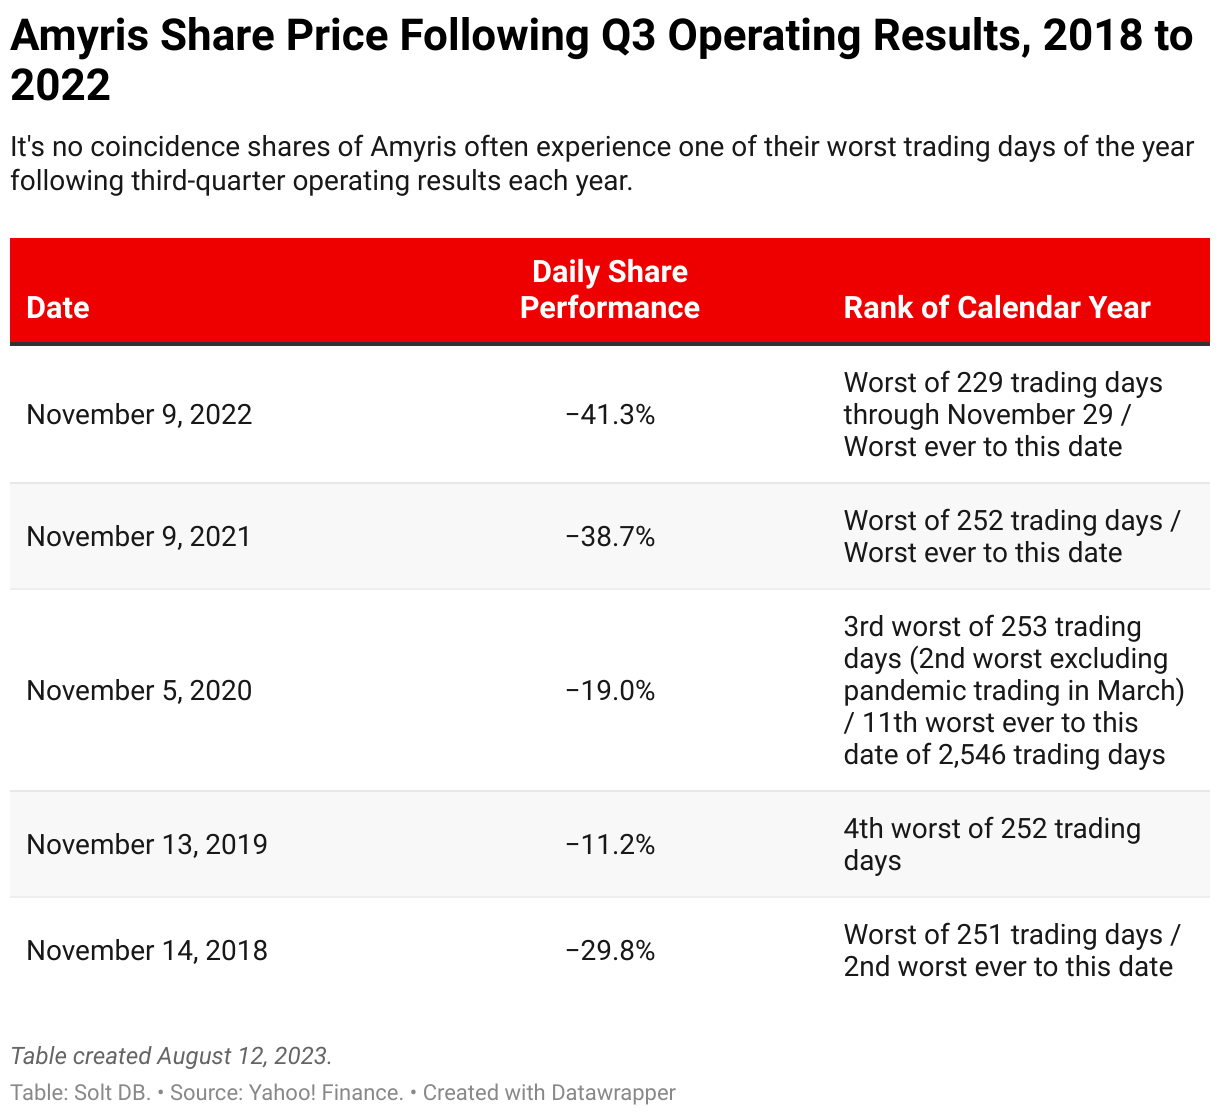 A table showing the share price of Amyris after third-quarter operating results from 2018 through 2022.